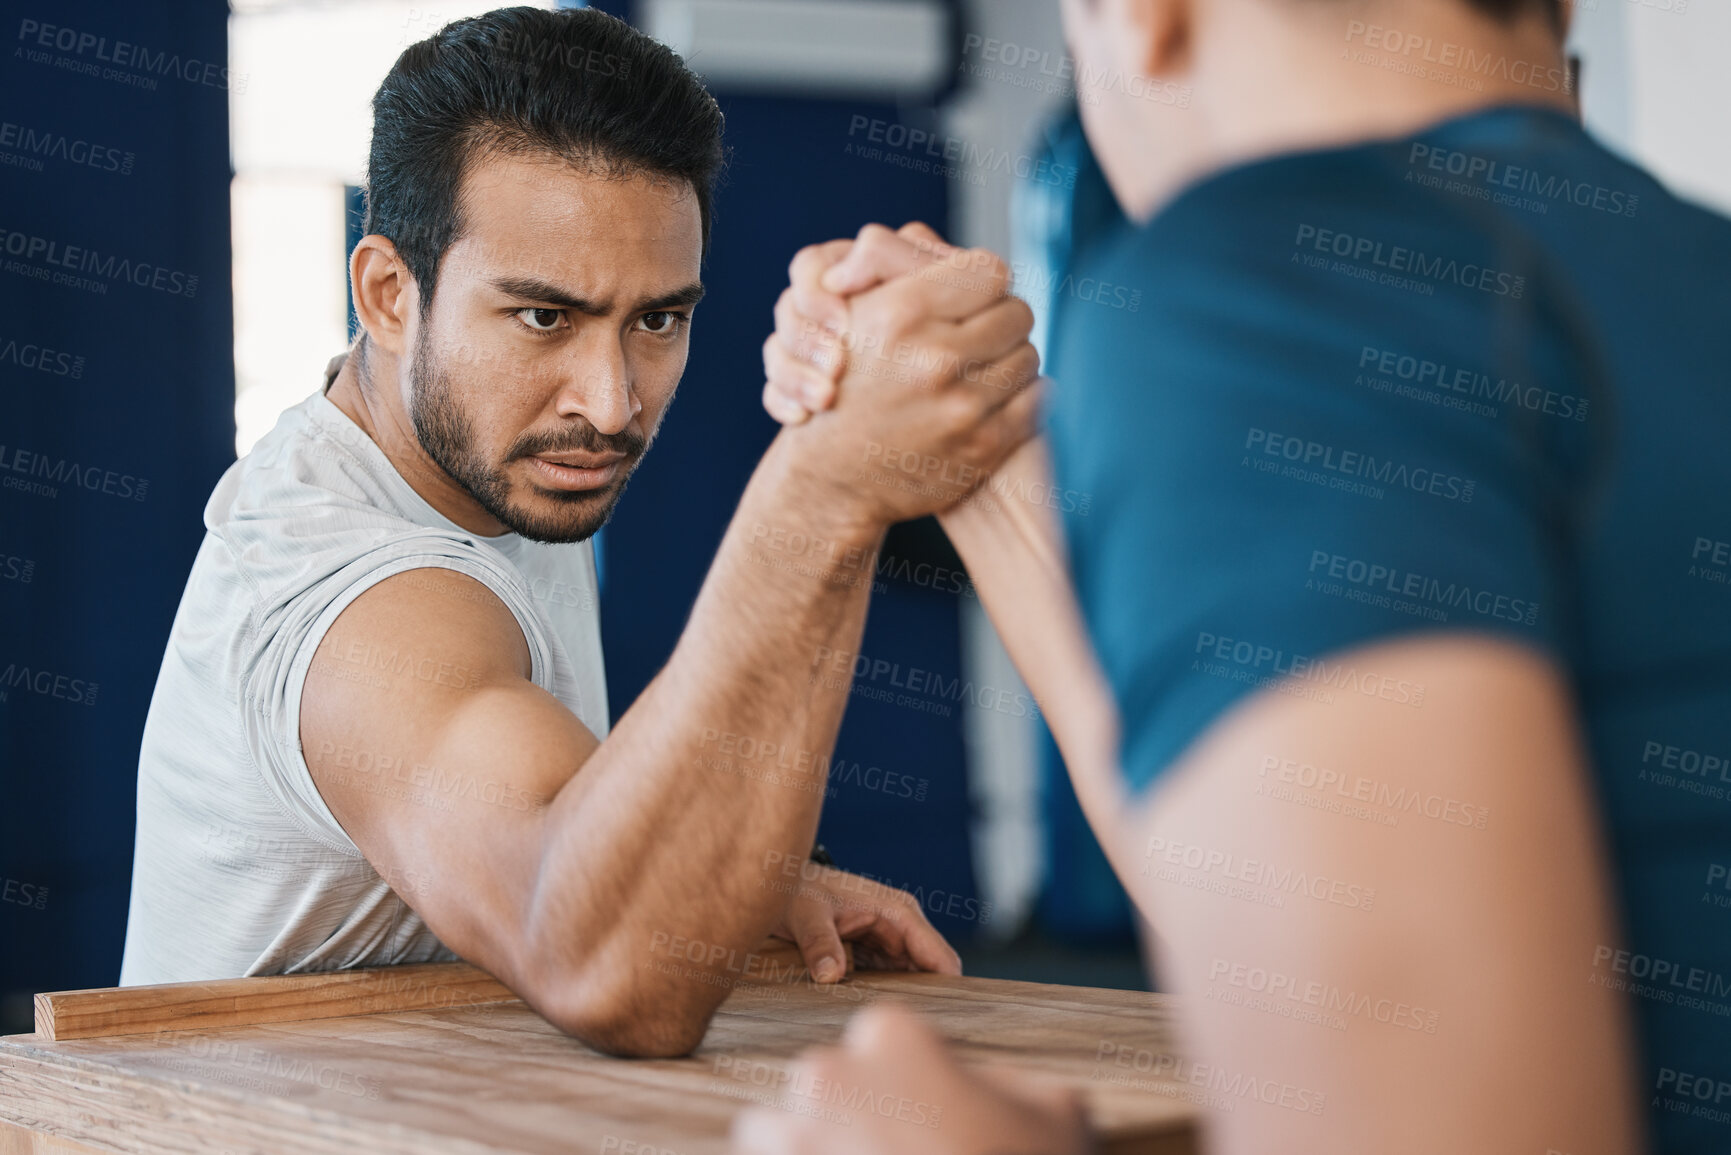 Buy stock photo Strength, motivation and male people arm wrestling on a table while being playful for a challenge. Rivalry, game and men athletes doing strength muscles battle for fun, bonding and friendship in gym.